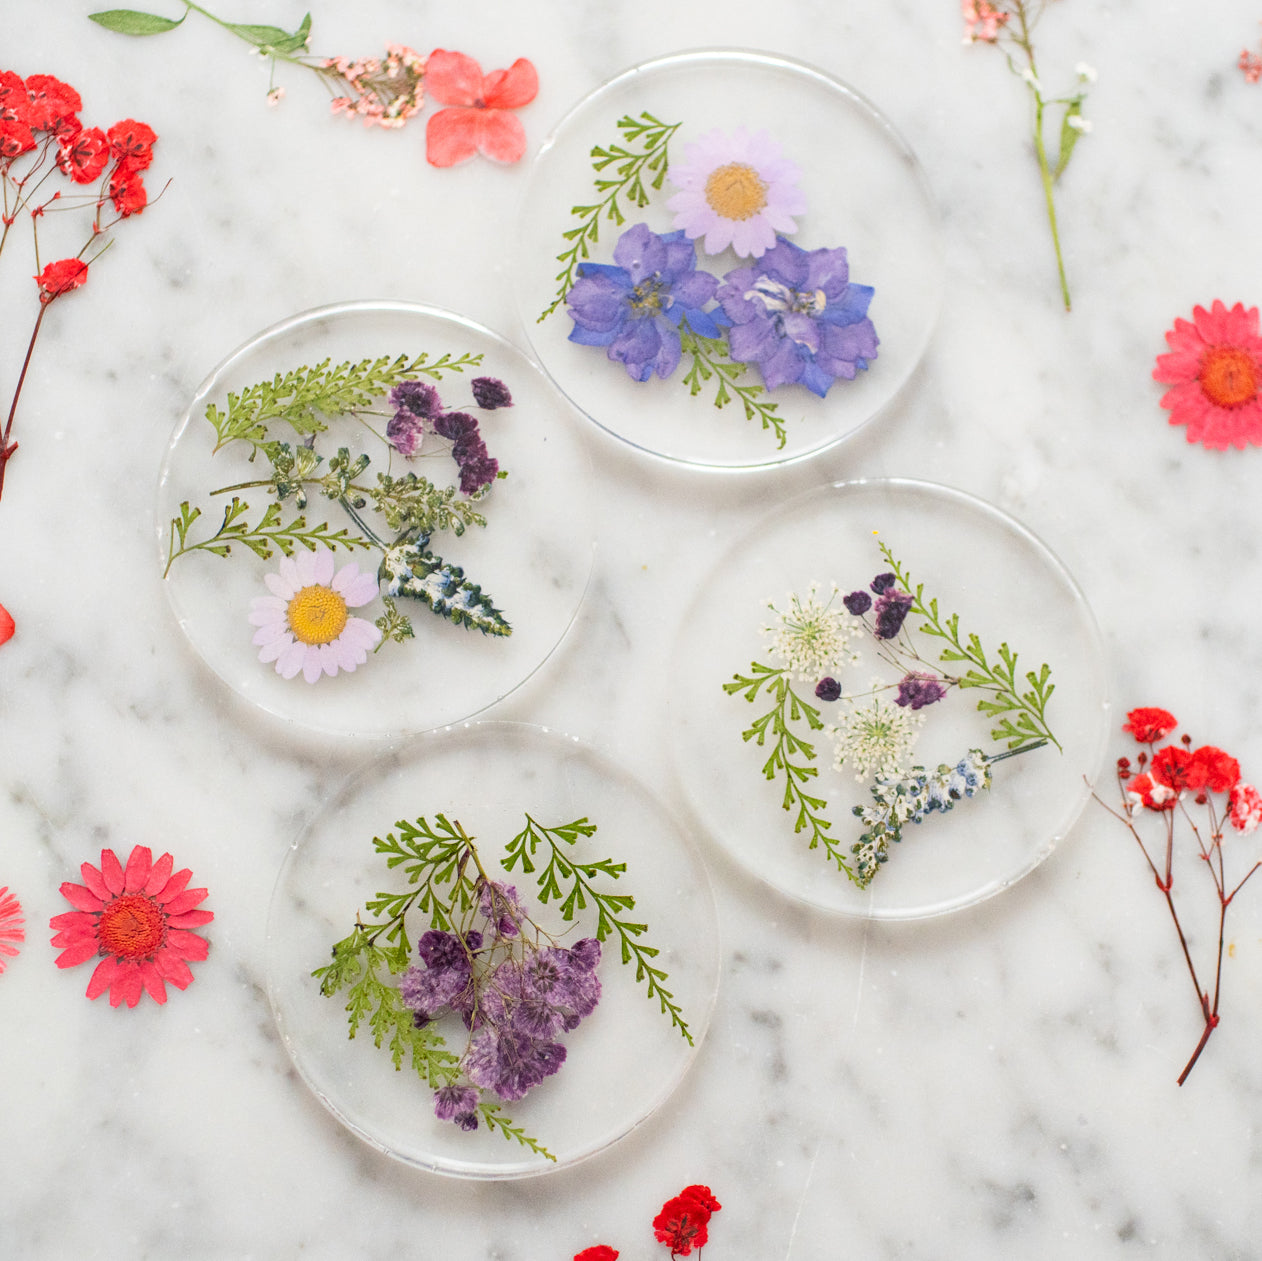 Our Guide to Resin For Beginners: Make Dried Flower Coasters